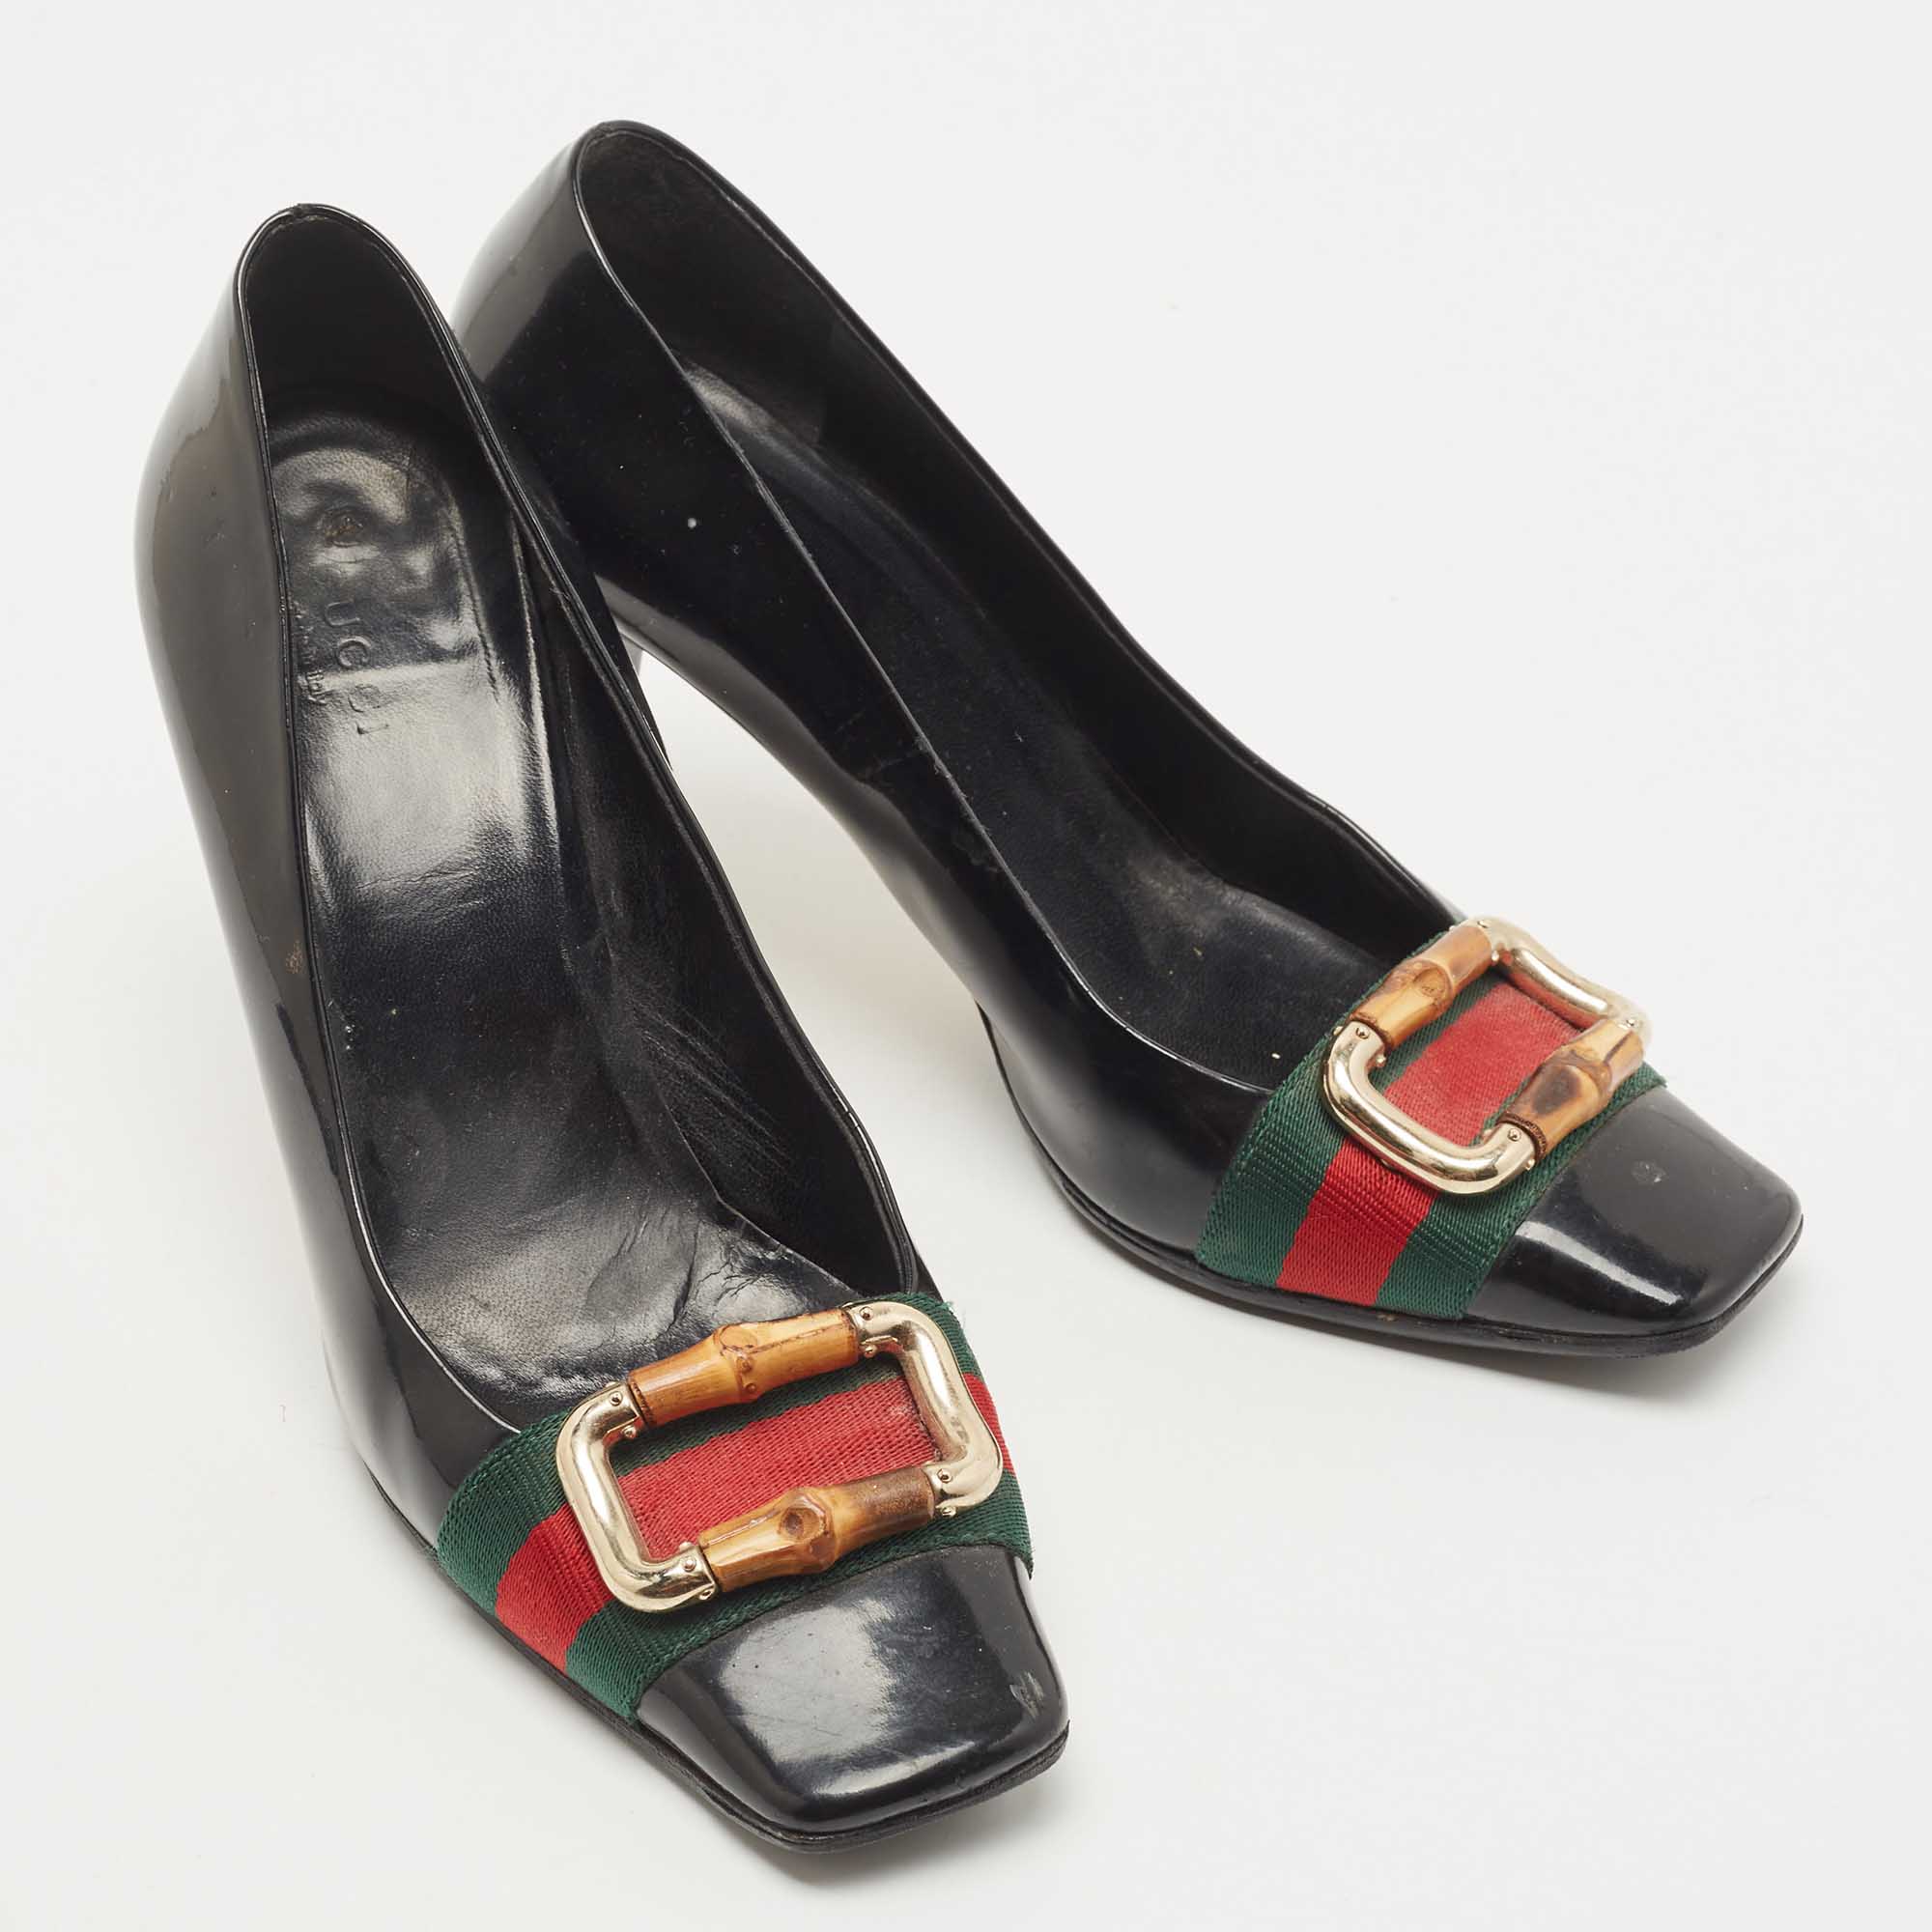 Gucci Black Patent Leather And Canvas Web Bamboo Buckle Pumps Size 36